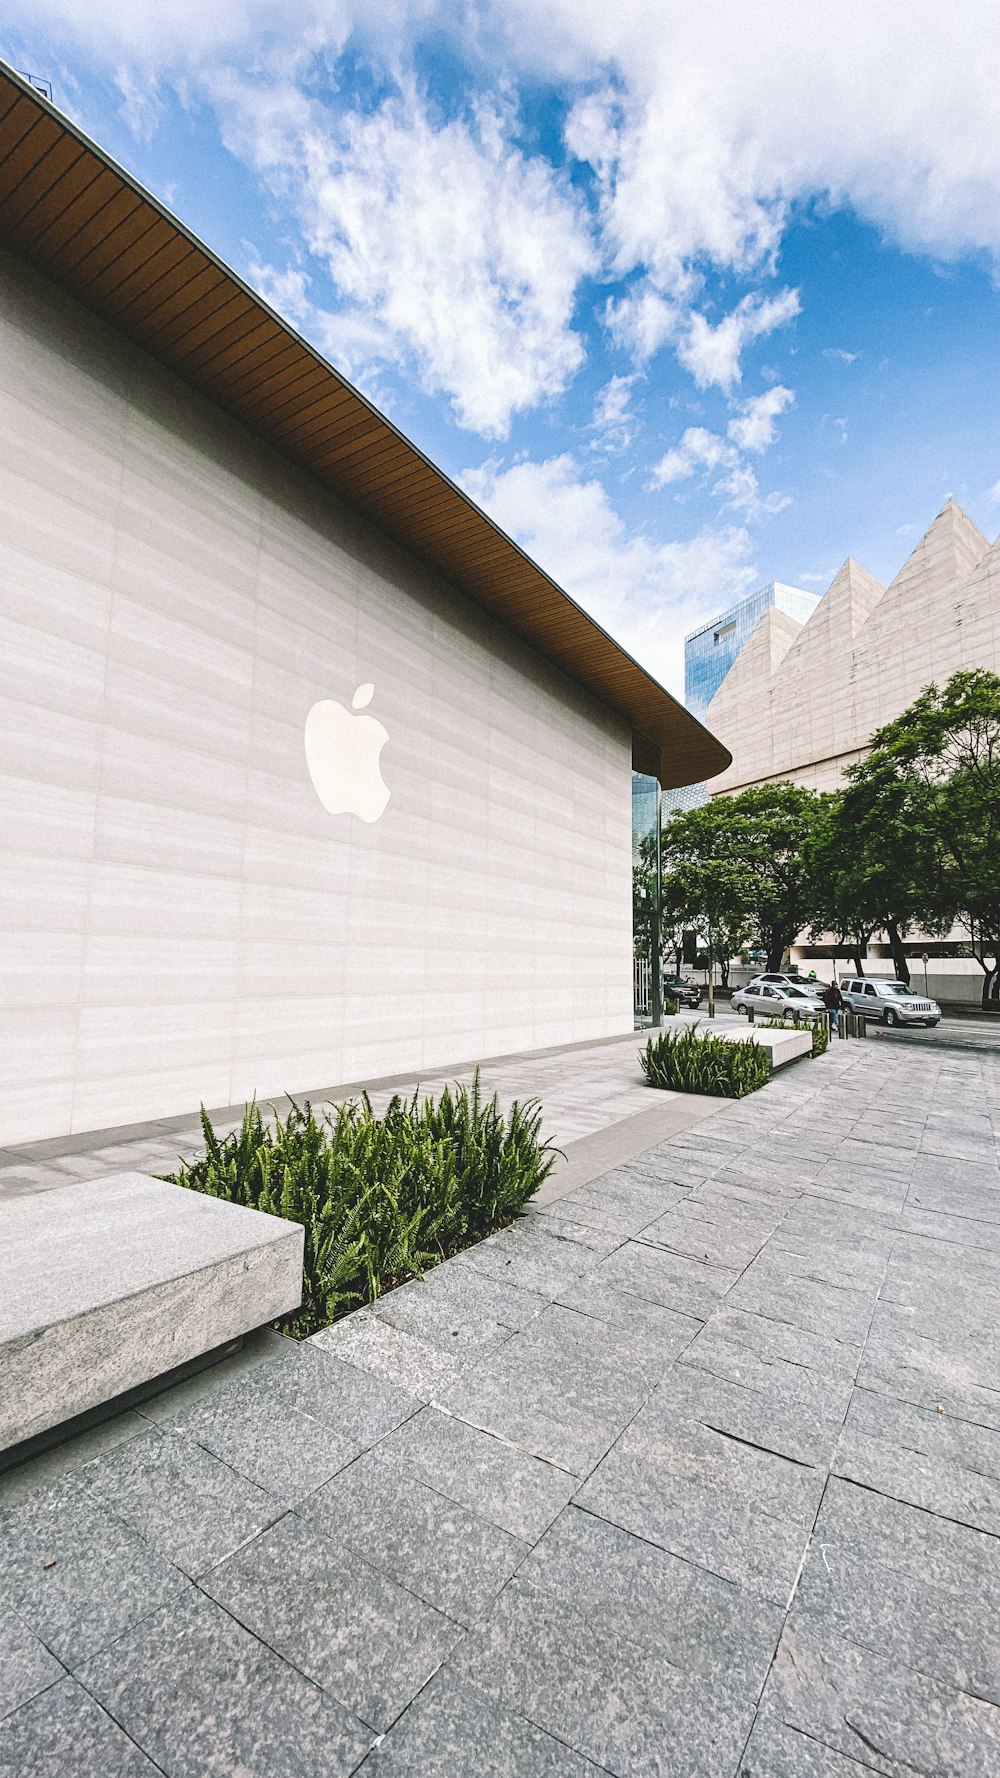 a building with a large apple logo on the side of it